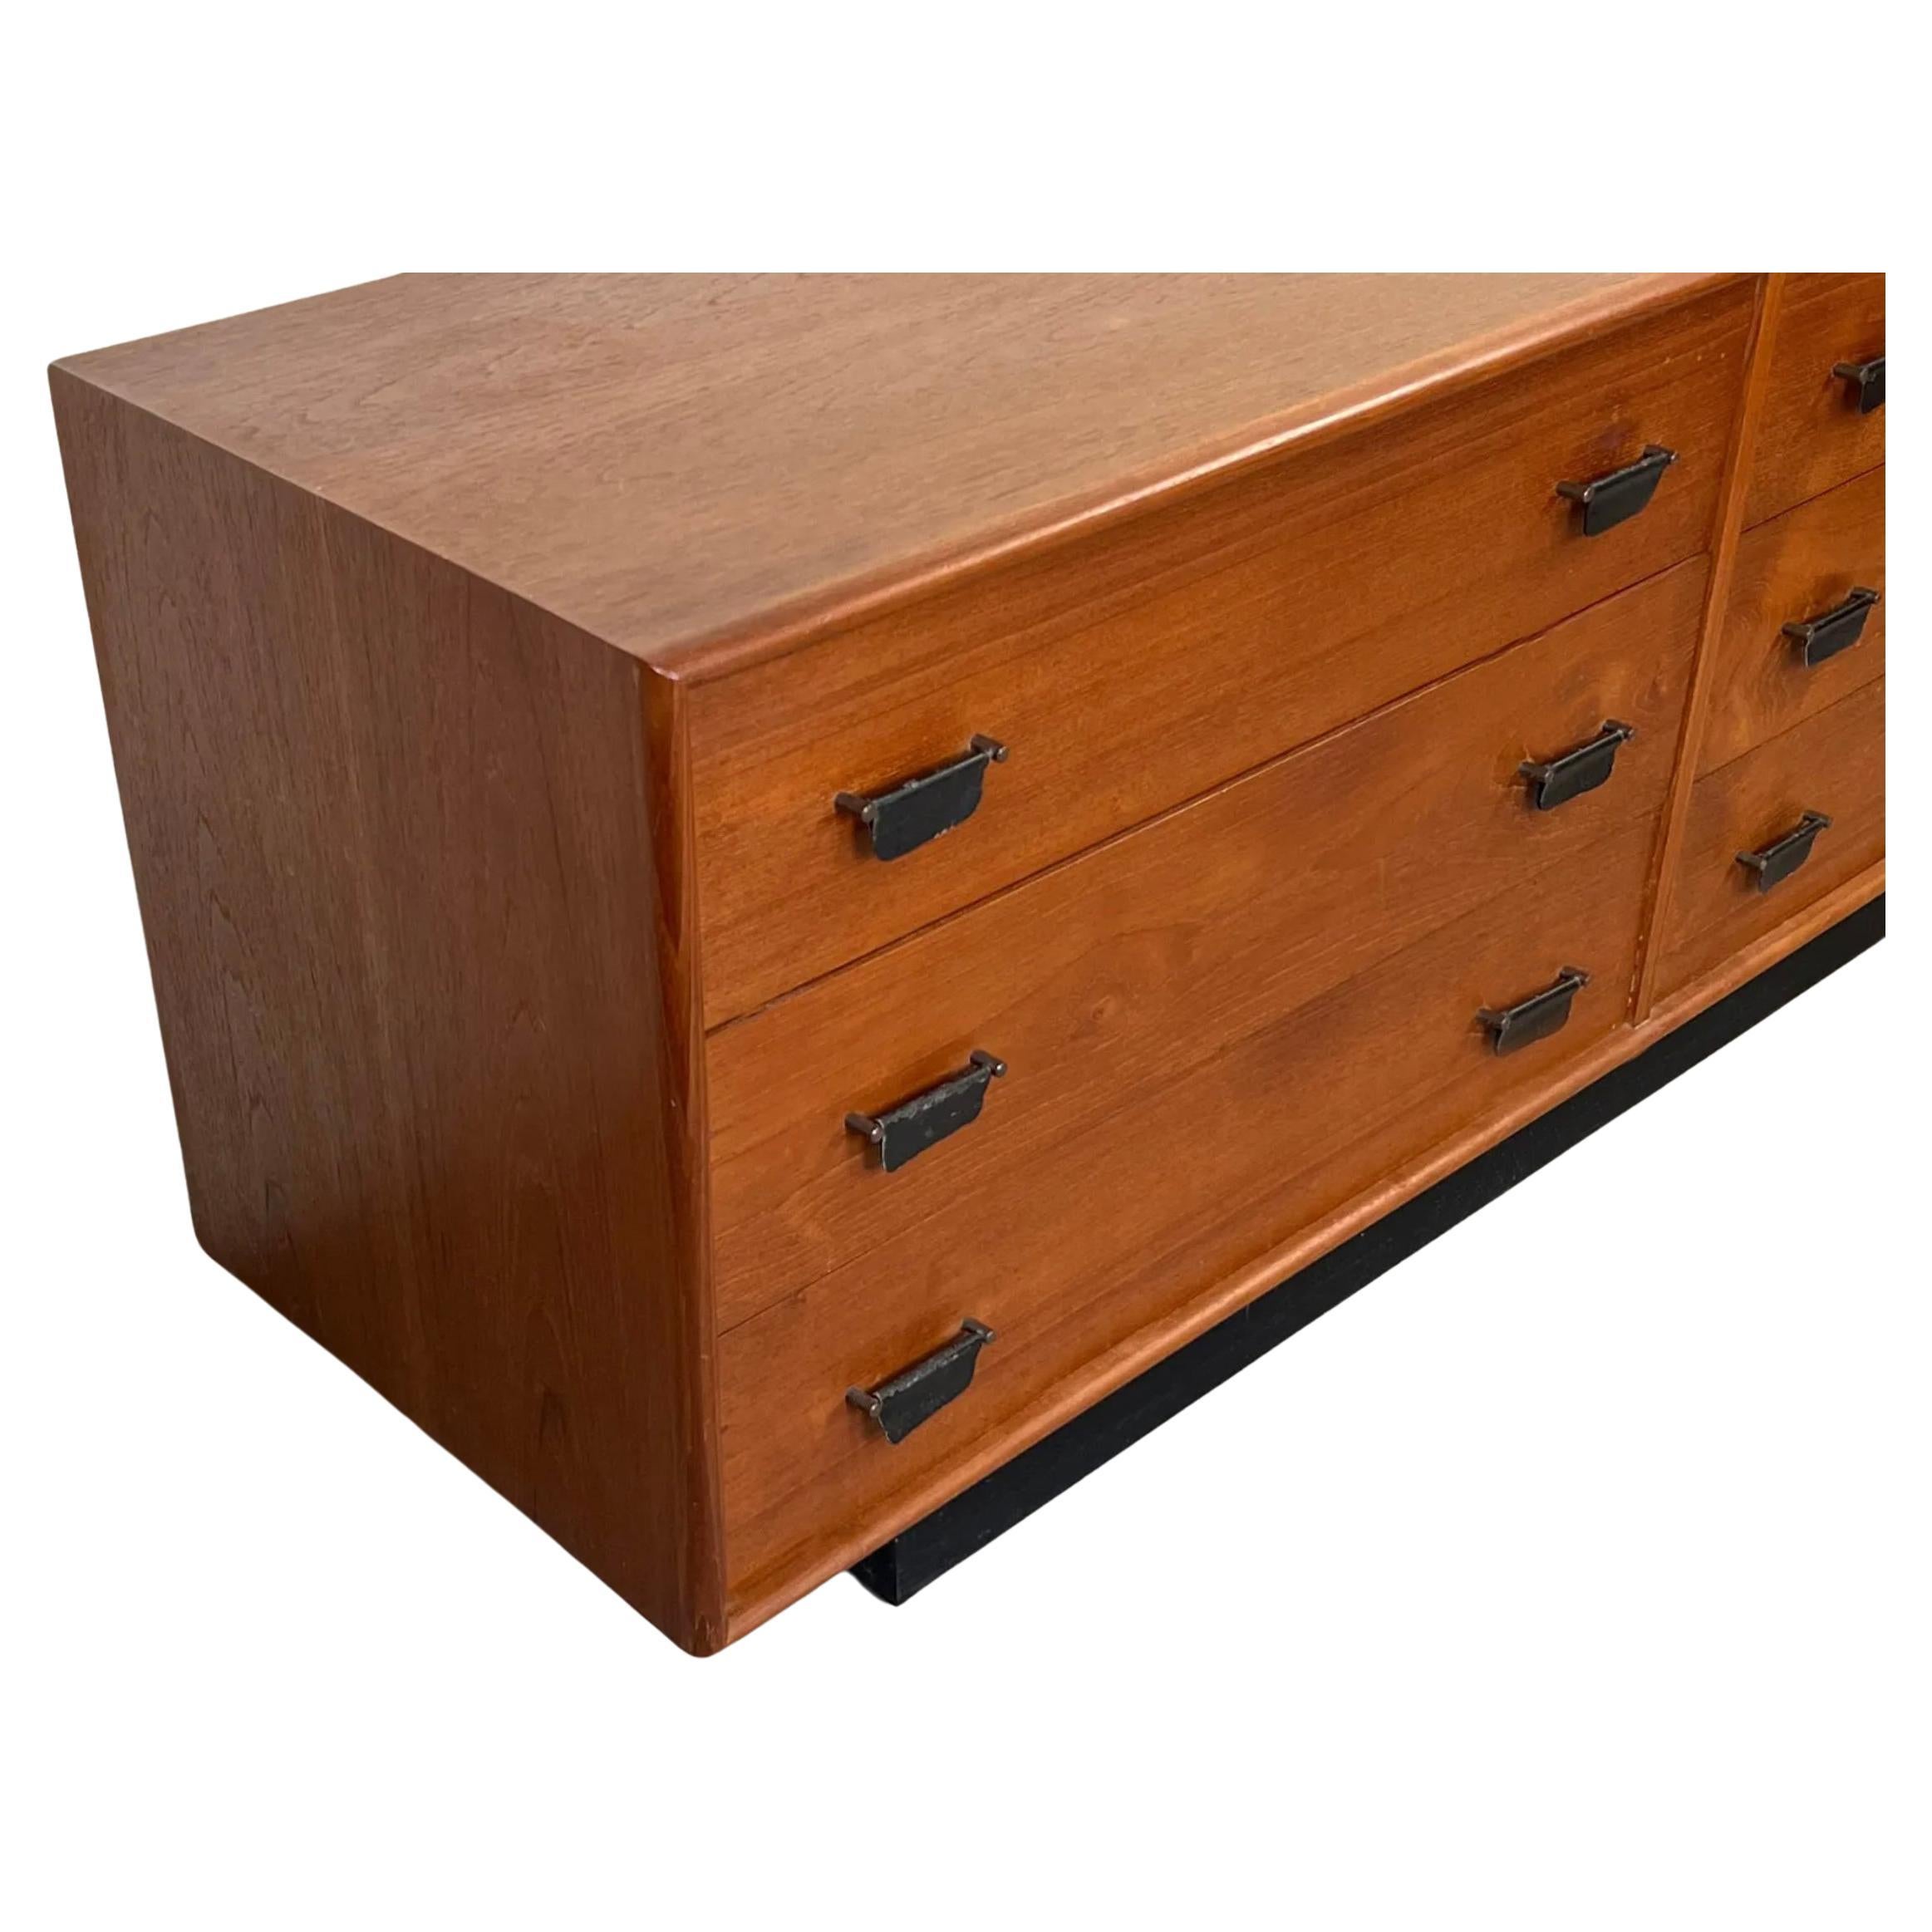 Danish Mid Century Modern Teak low 6 drawer dresser with leather pulls and plinth base For Sale